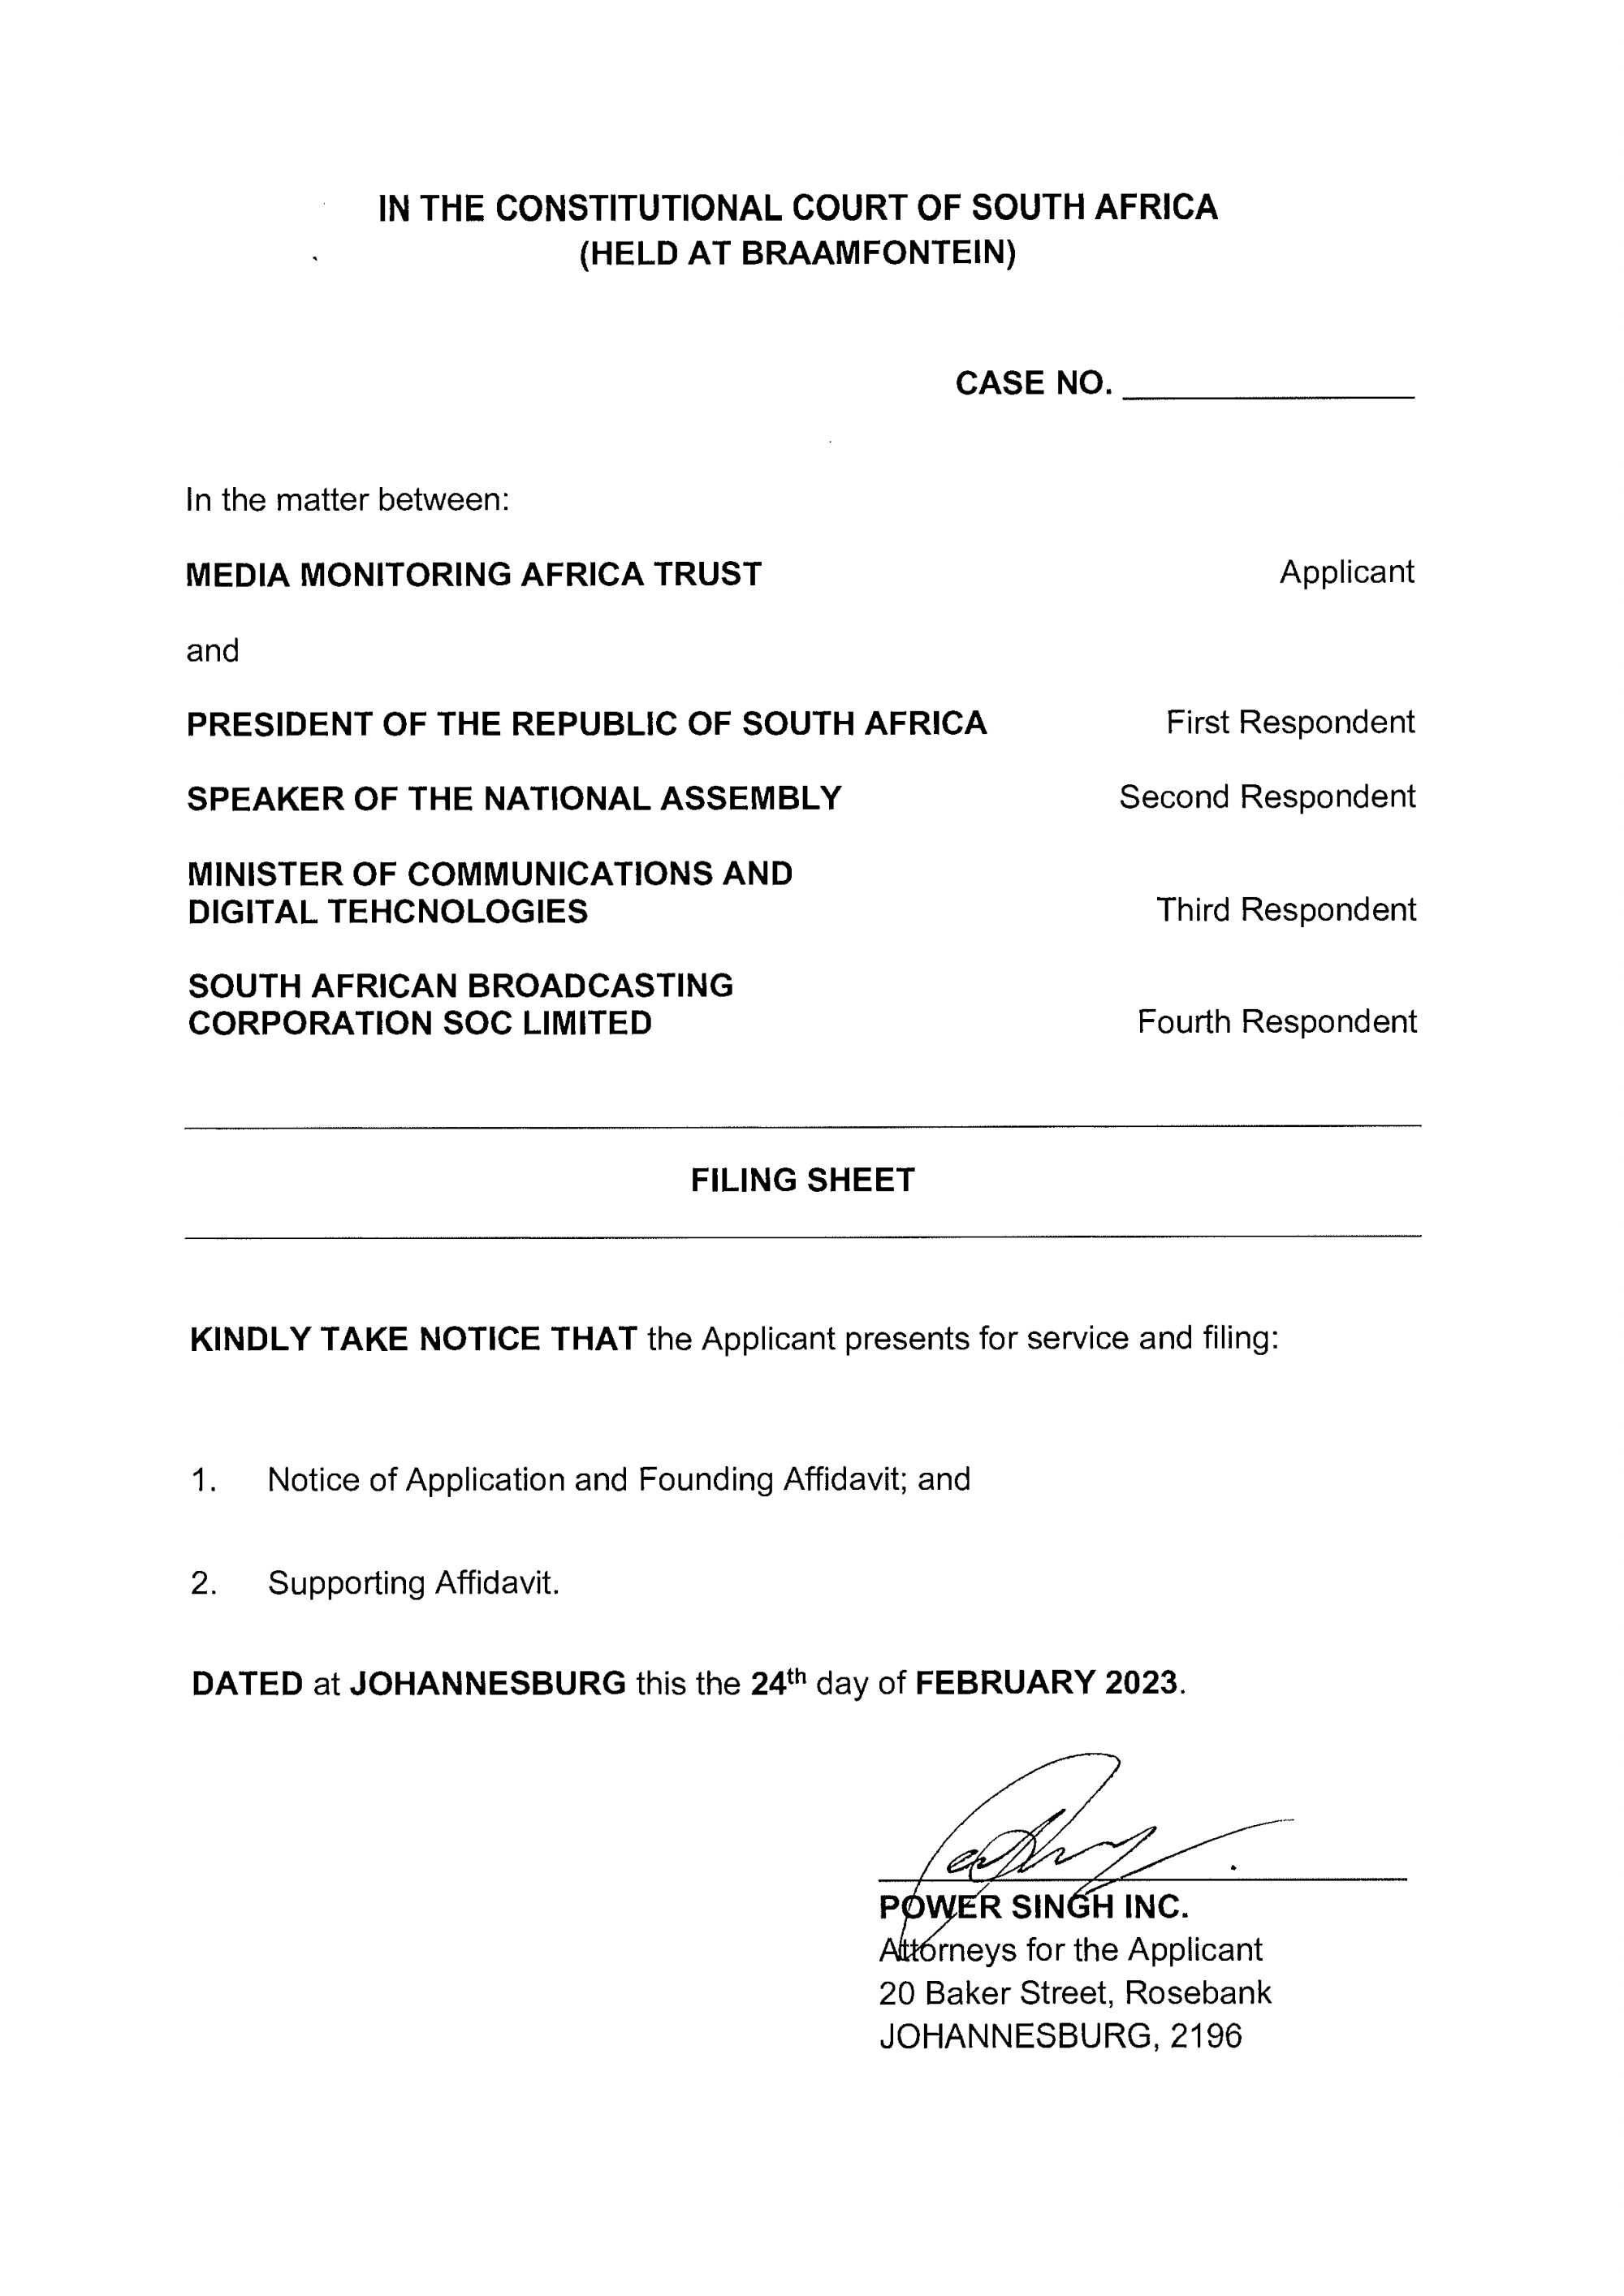 Page 1 of 230224 - MMA v President and Others - Urgent Appliction_Redacted